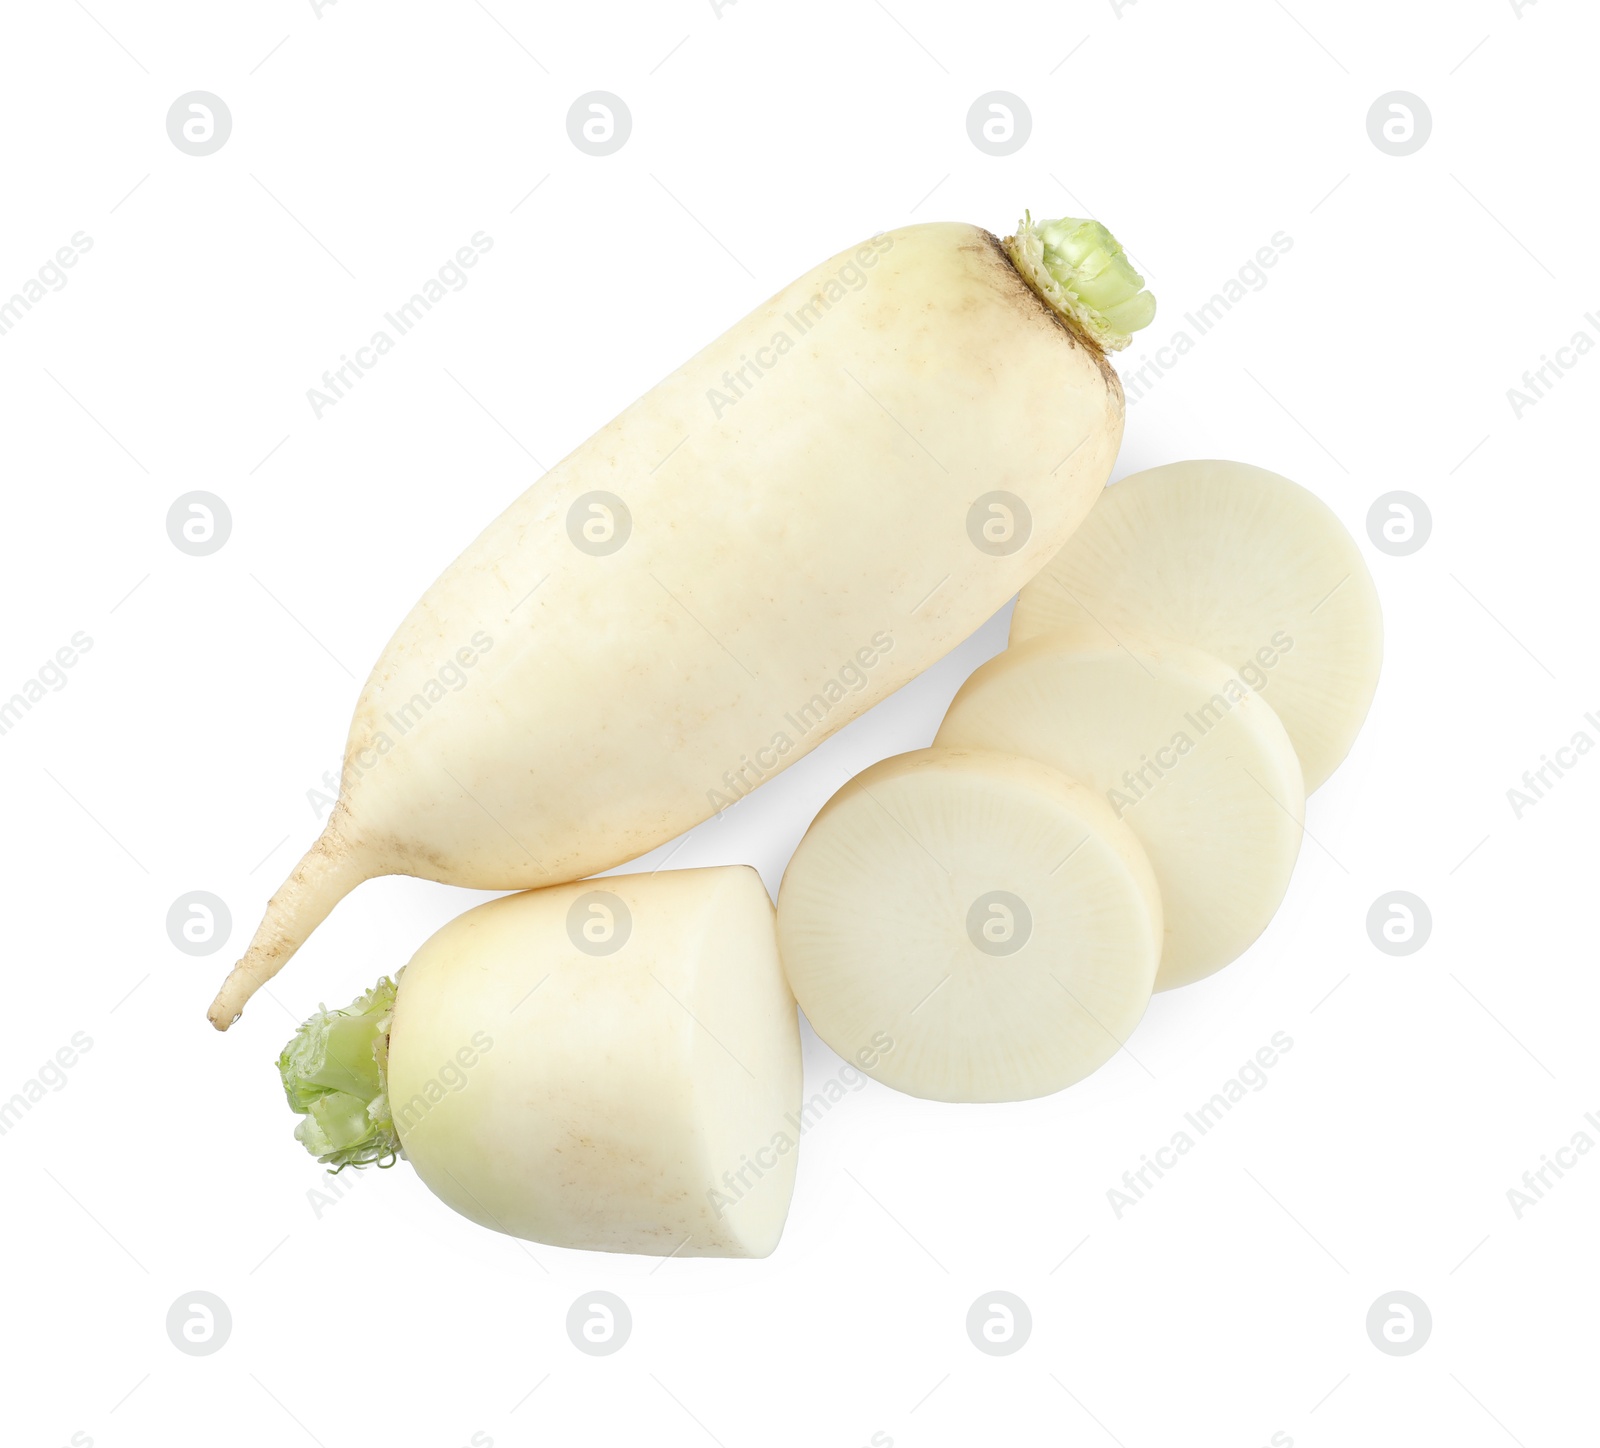 Photo of Sliced and whole fresh ripe turnips on white background, top view